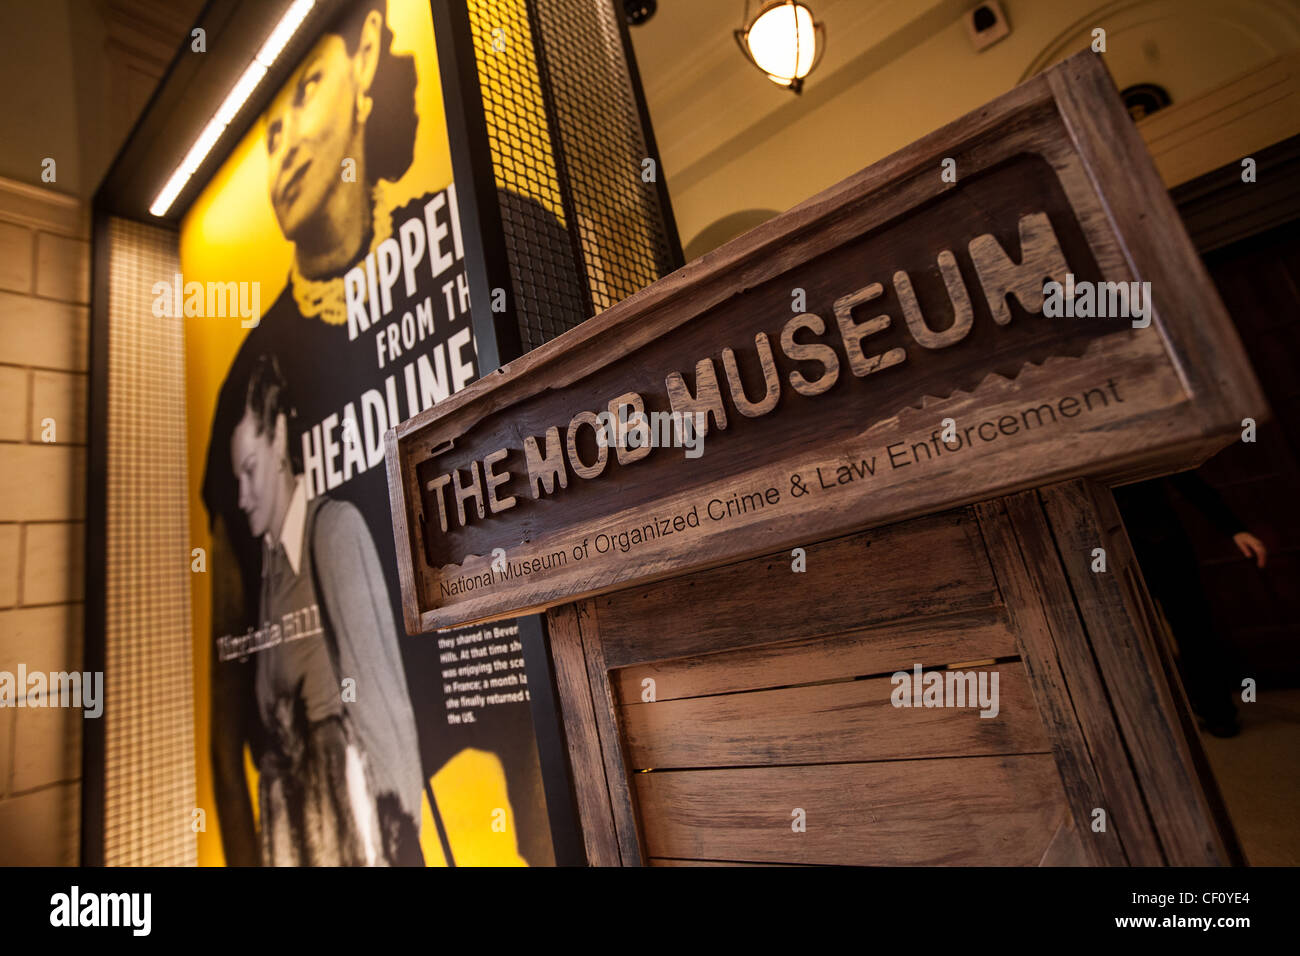 Entrance to the Mob Museum opened in a former courthouse in Las Vegas on February 14, 2012. The $42 million dollar museum features exhibits on organized crime in America with emphasis on their role in Las Vegas. Stock Photo